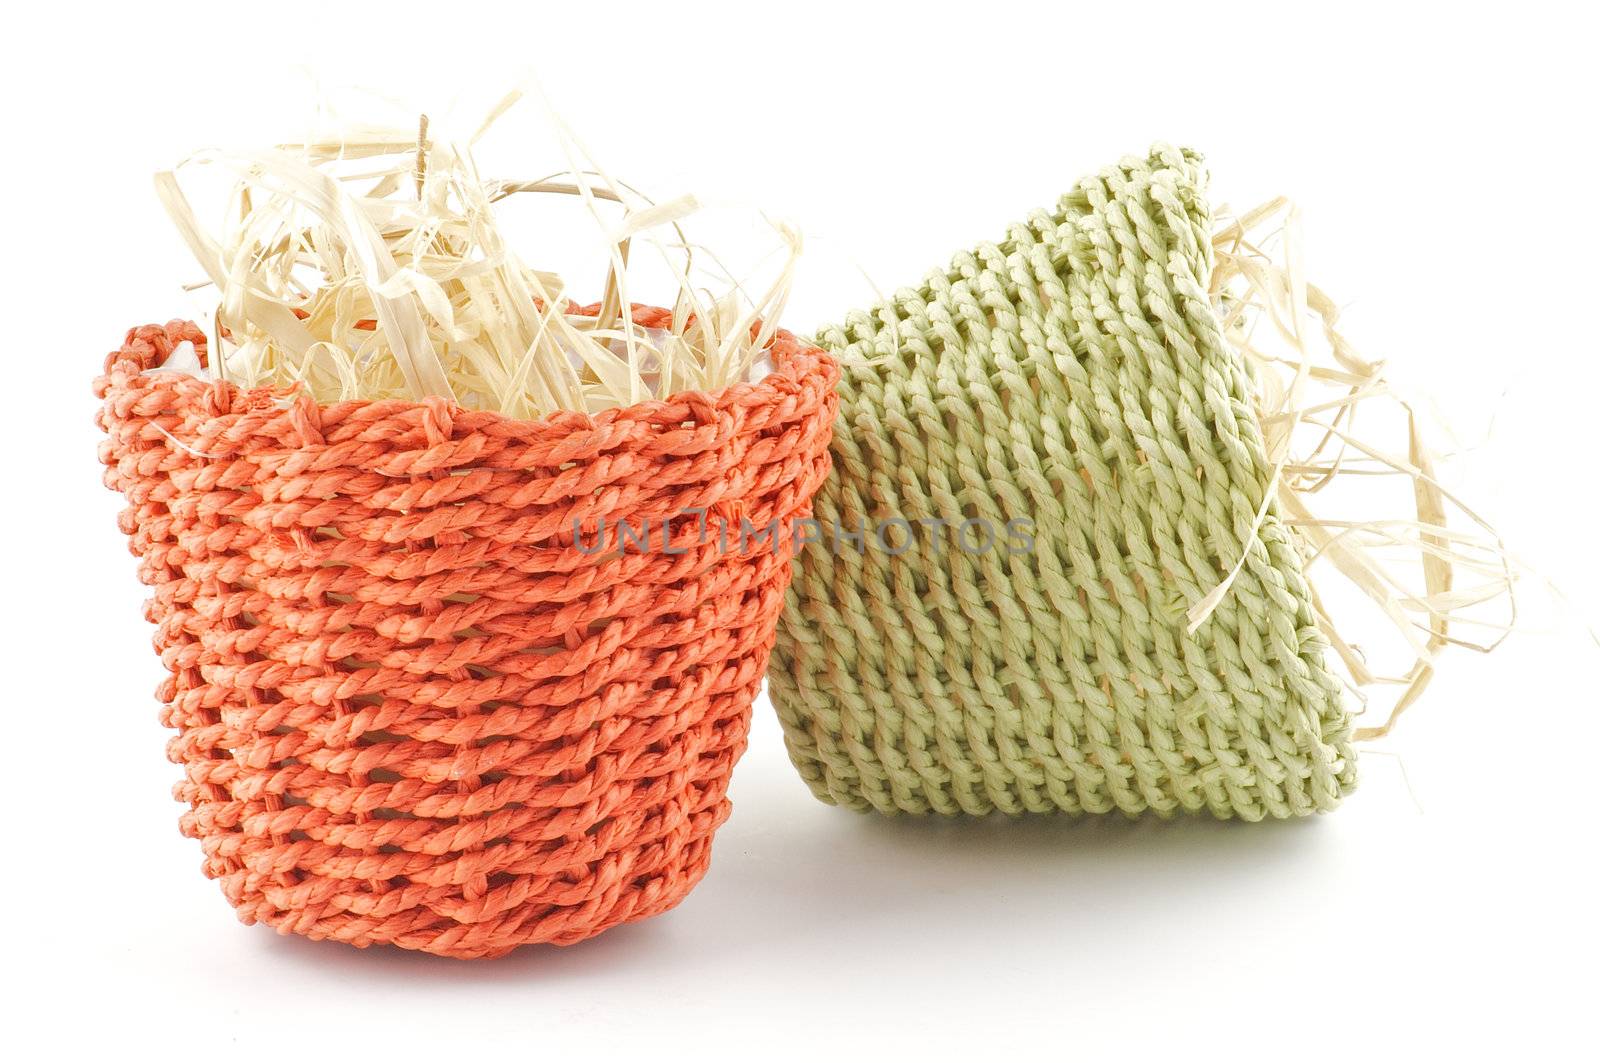 Green and red little wicker flower pots with straw isolated on white background